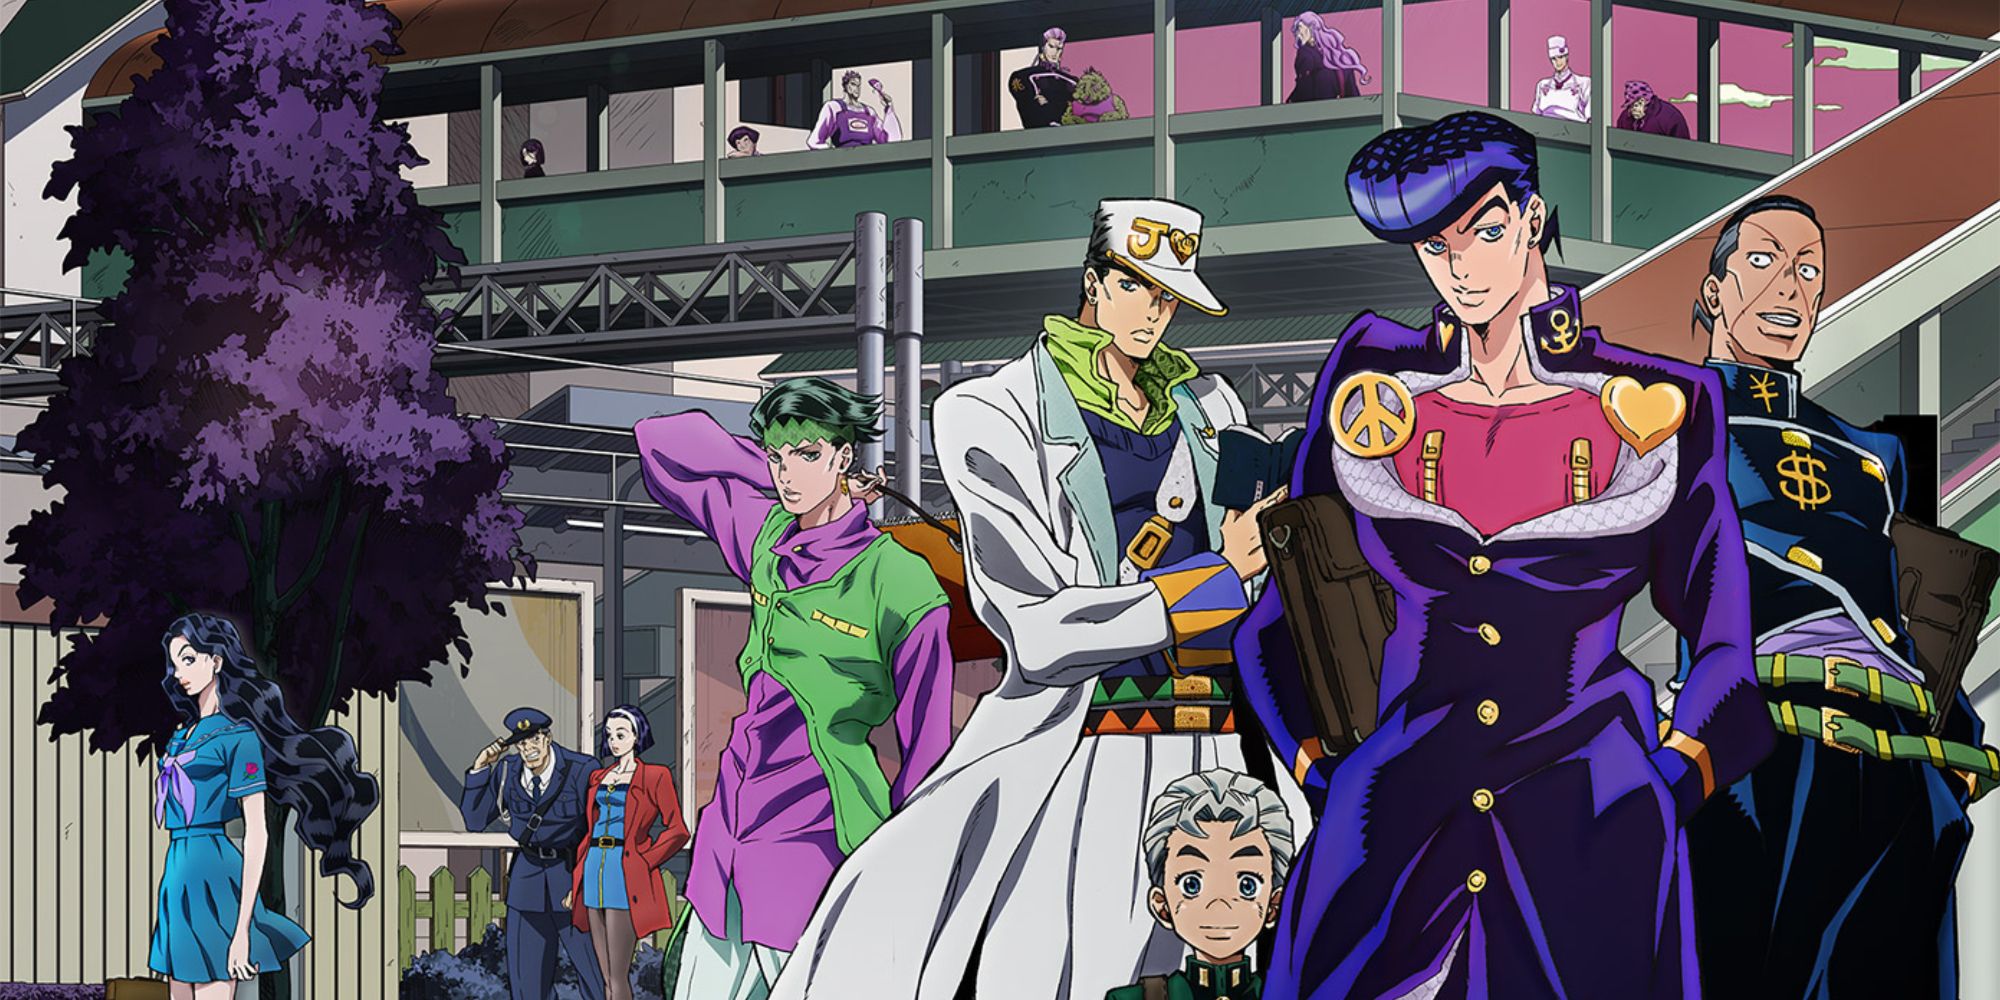 A collage of characters from JoJo's Bizarre Adventure standing in a city, in front of a building.